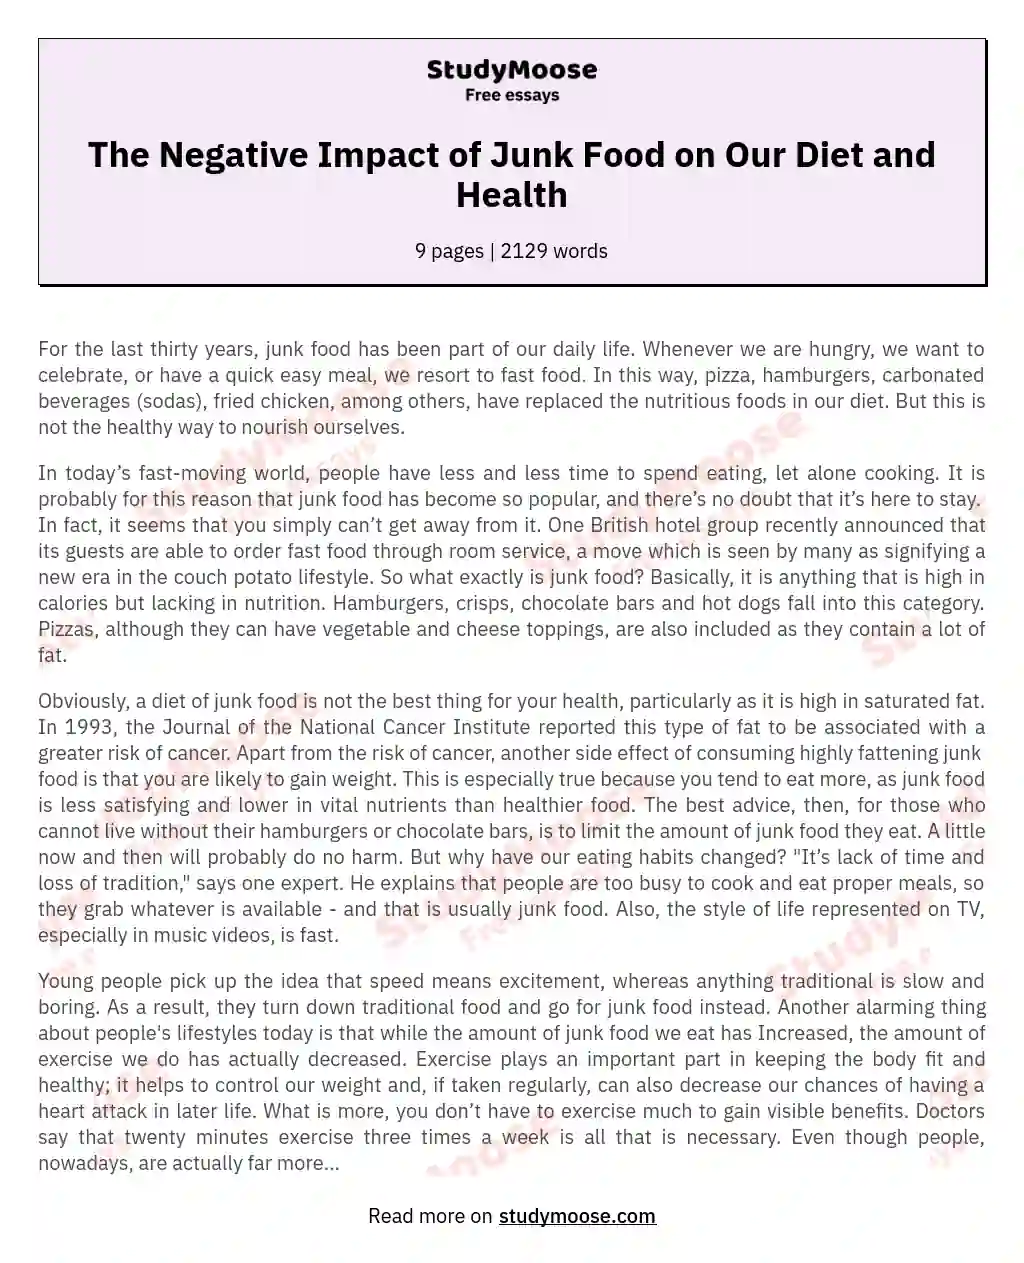 The Negative Impact of Junk Food on Our Diet and Health essay